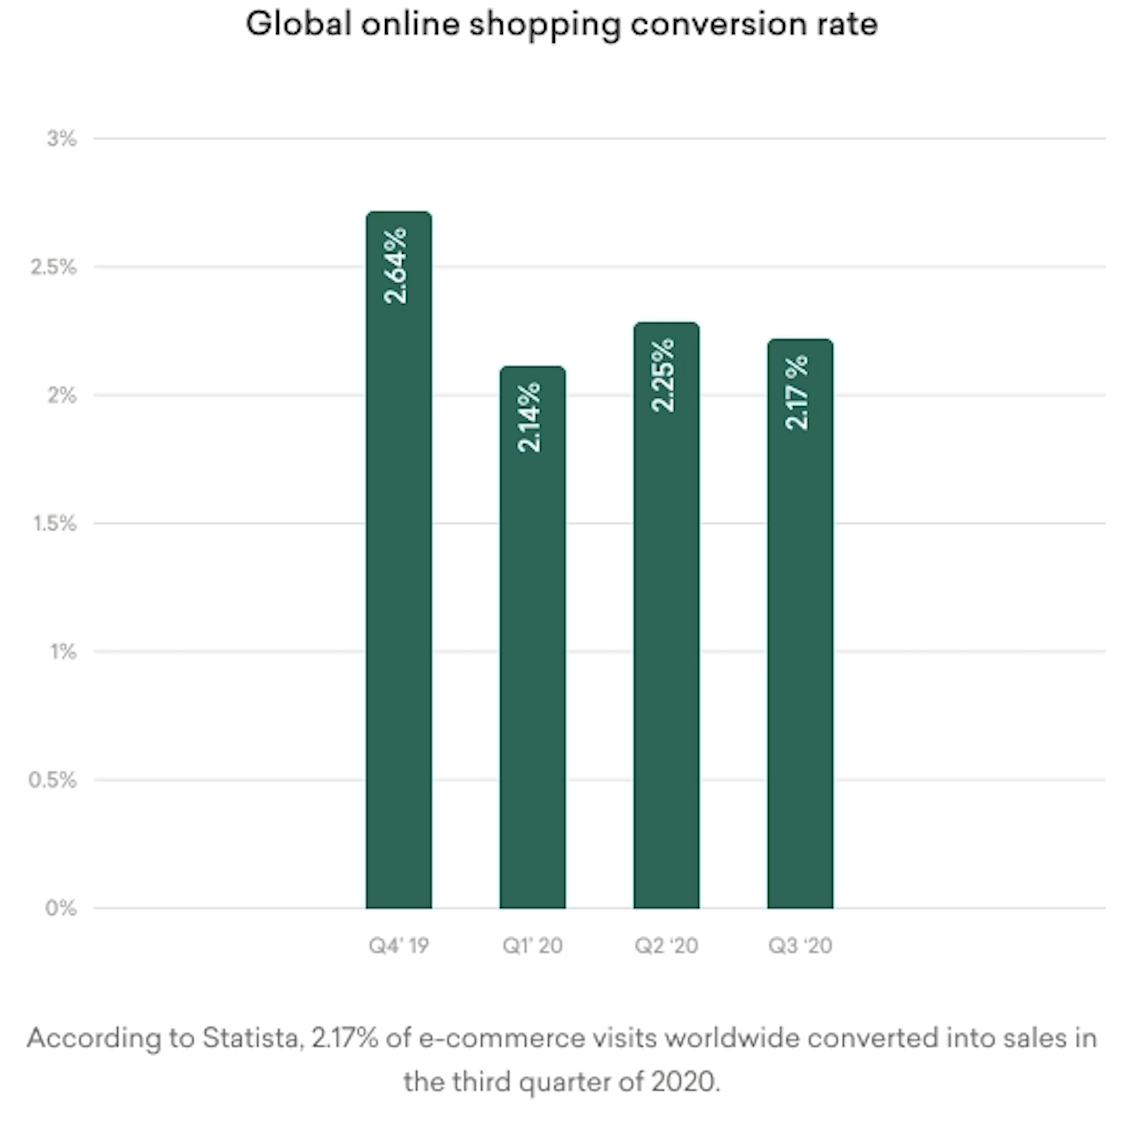 eCommerce converions average 2%